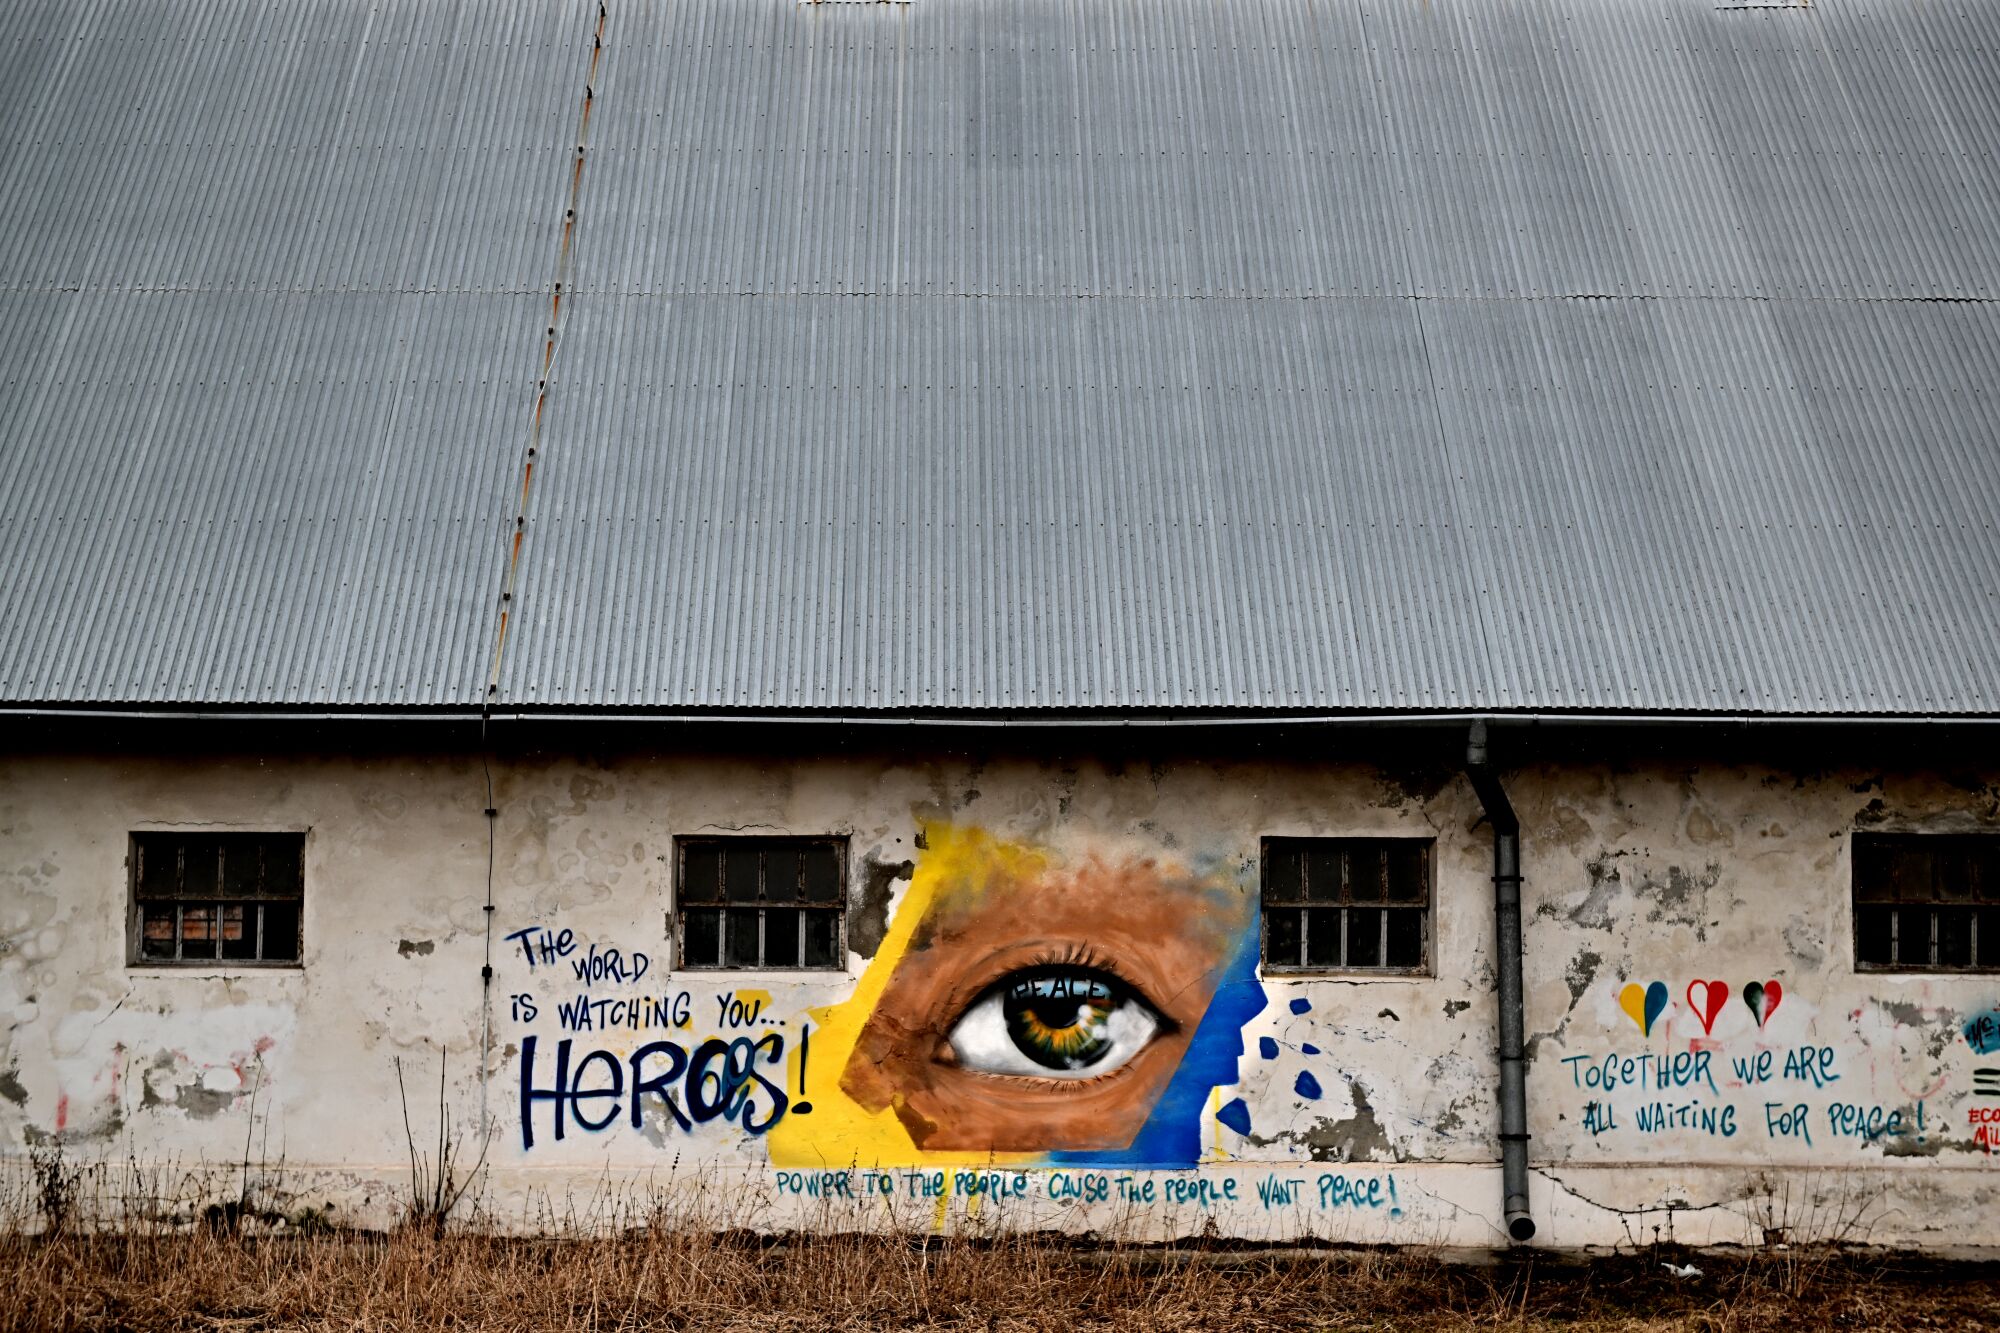 A mural painted on an abandoned building.